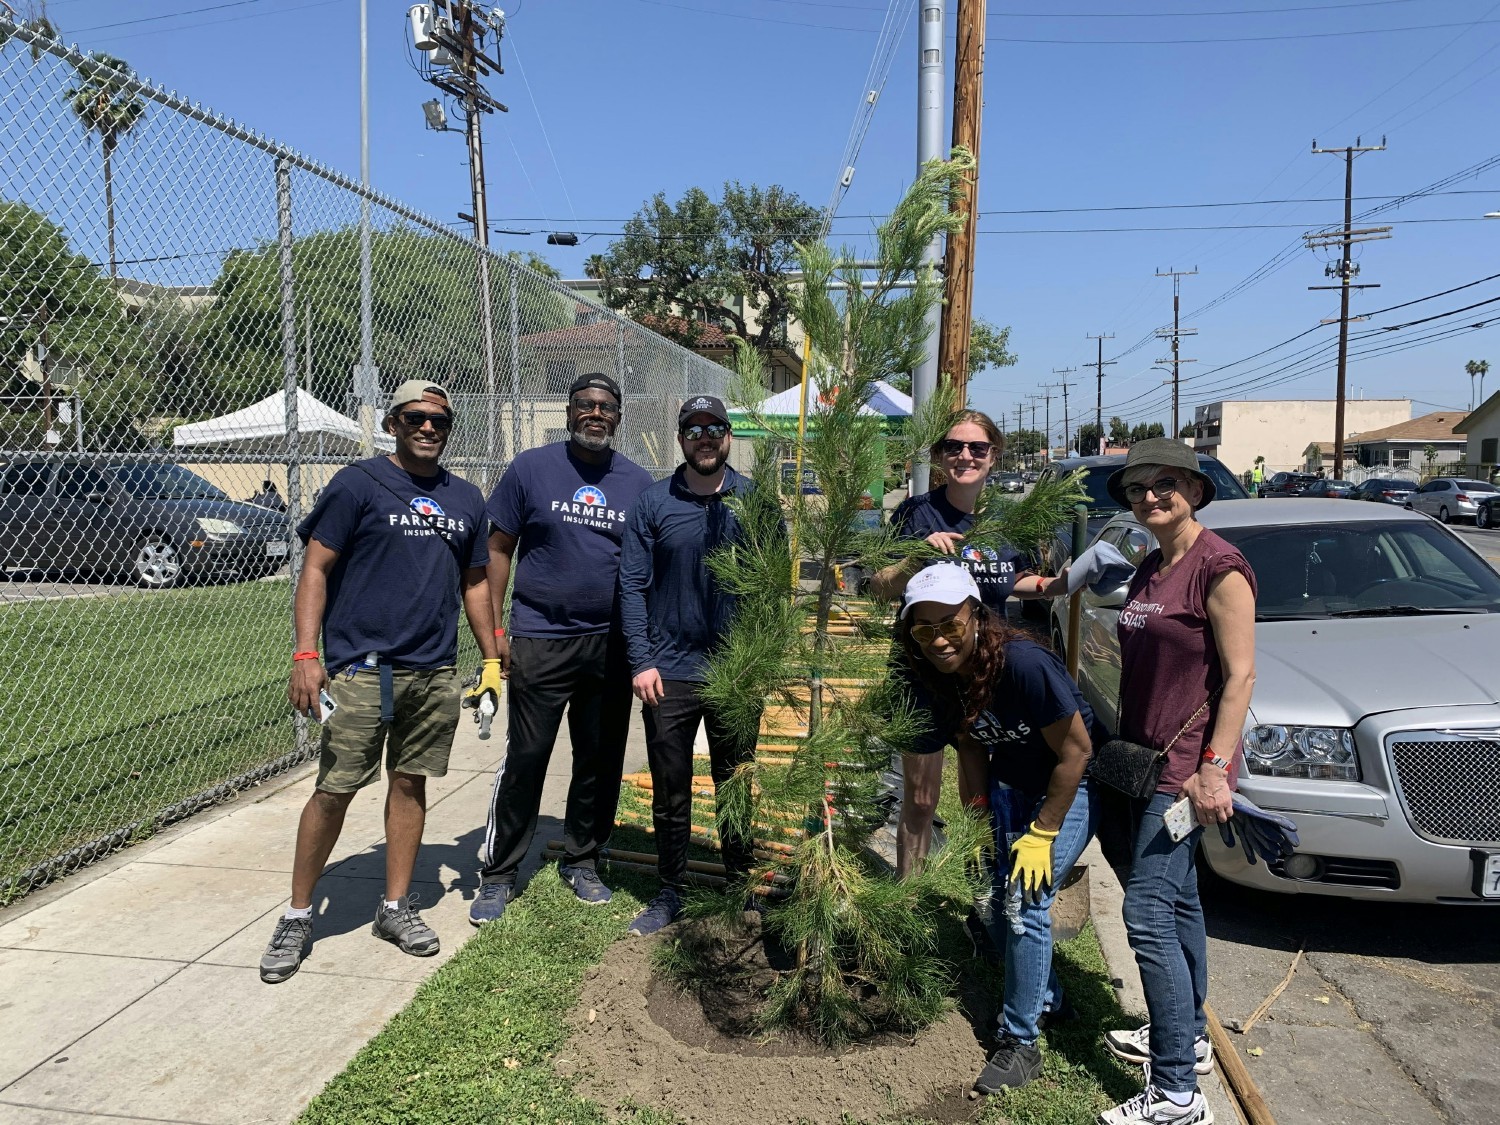 A group of Farmers ® employee volunteers planted new trees in a local community as part of our sustainability efforts.